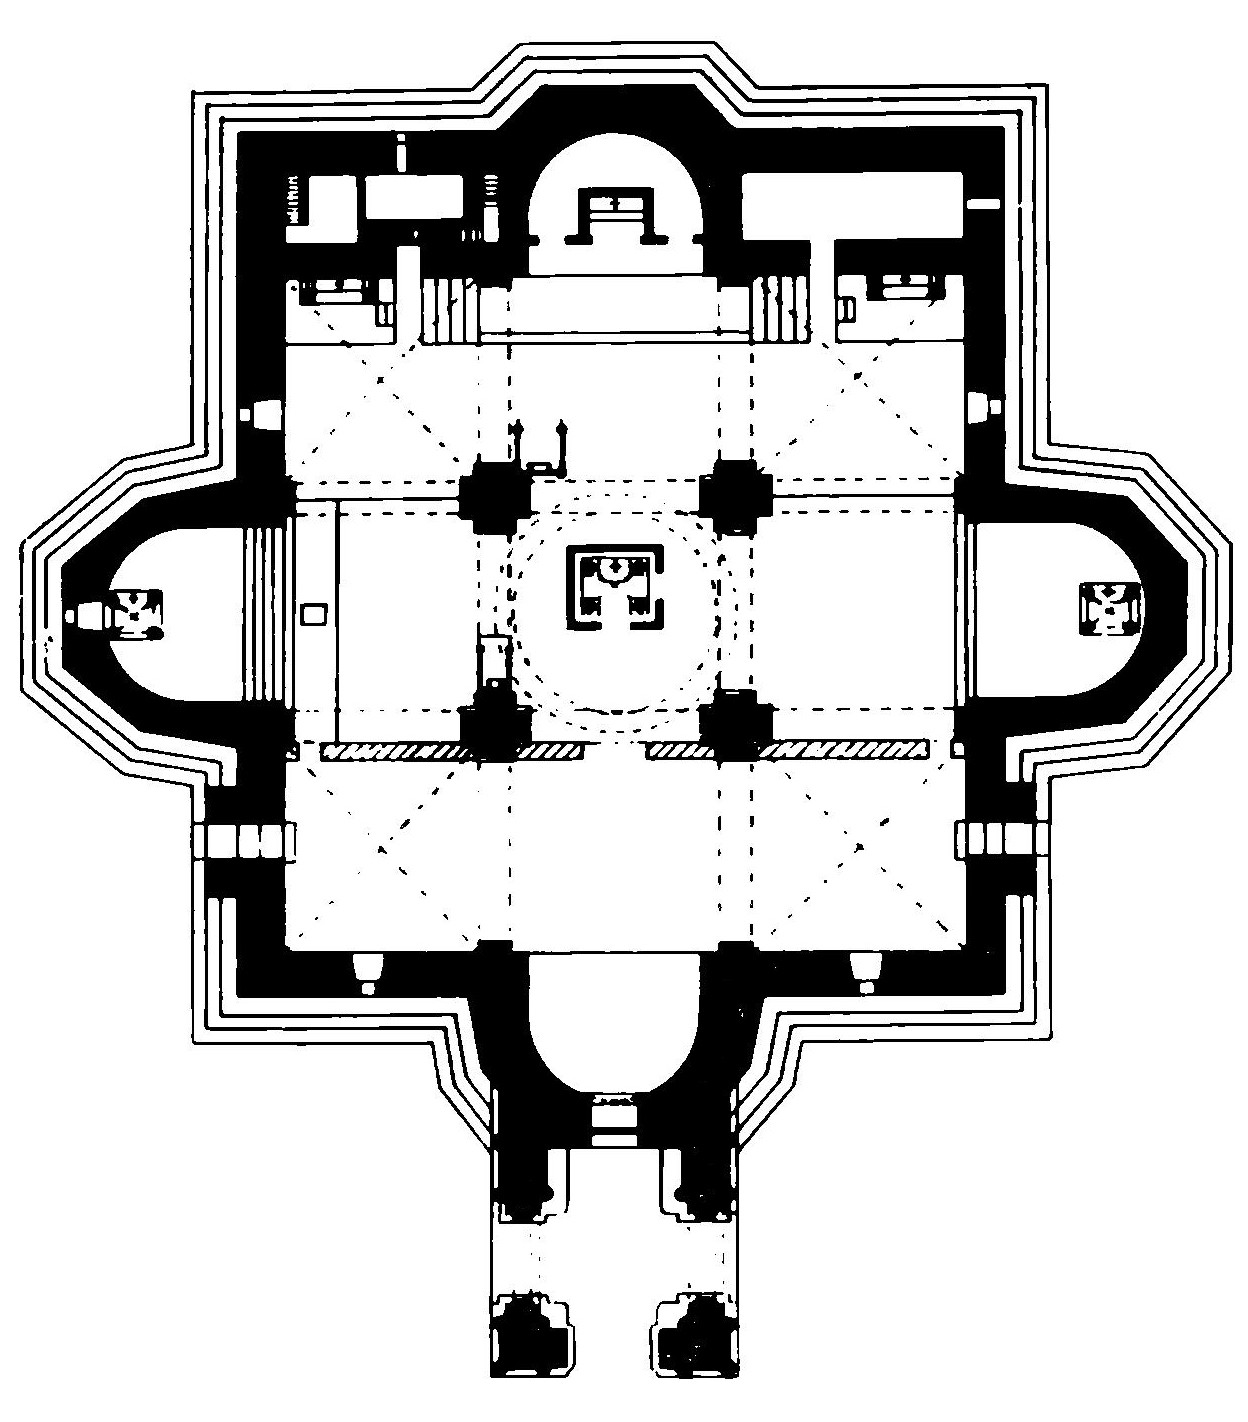 Plan of Etchmiadzin Cathedral